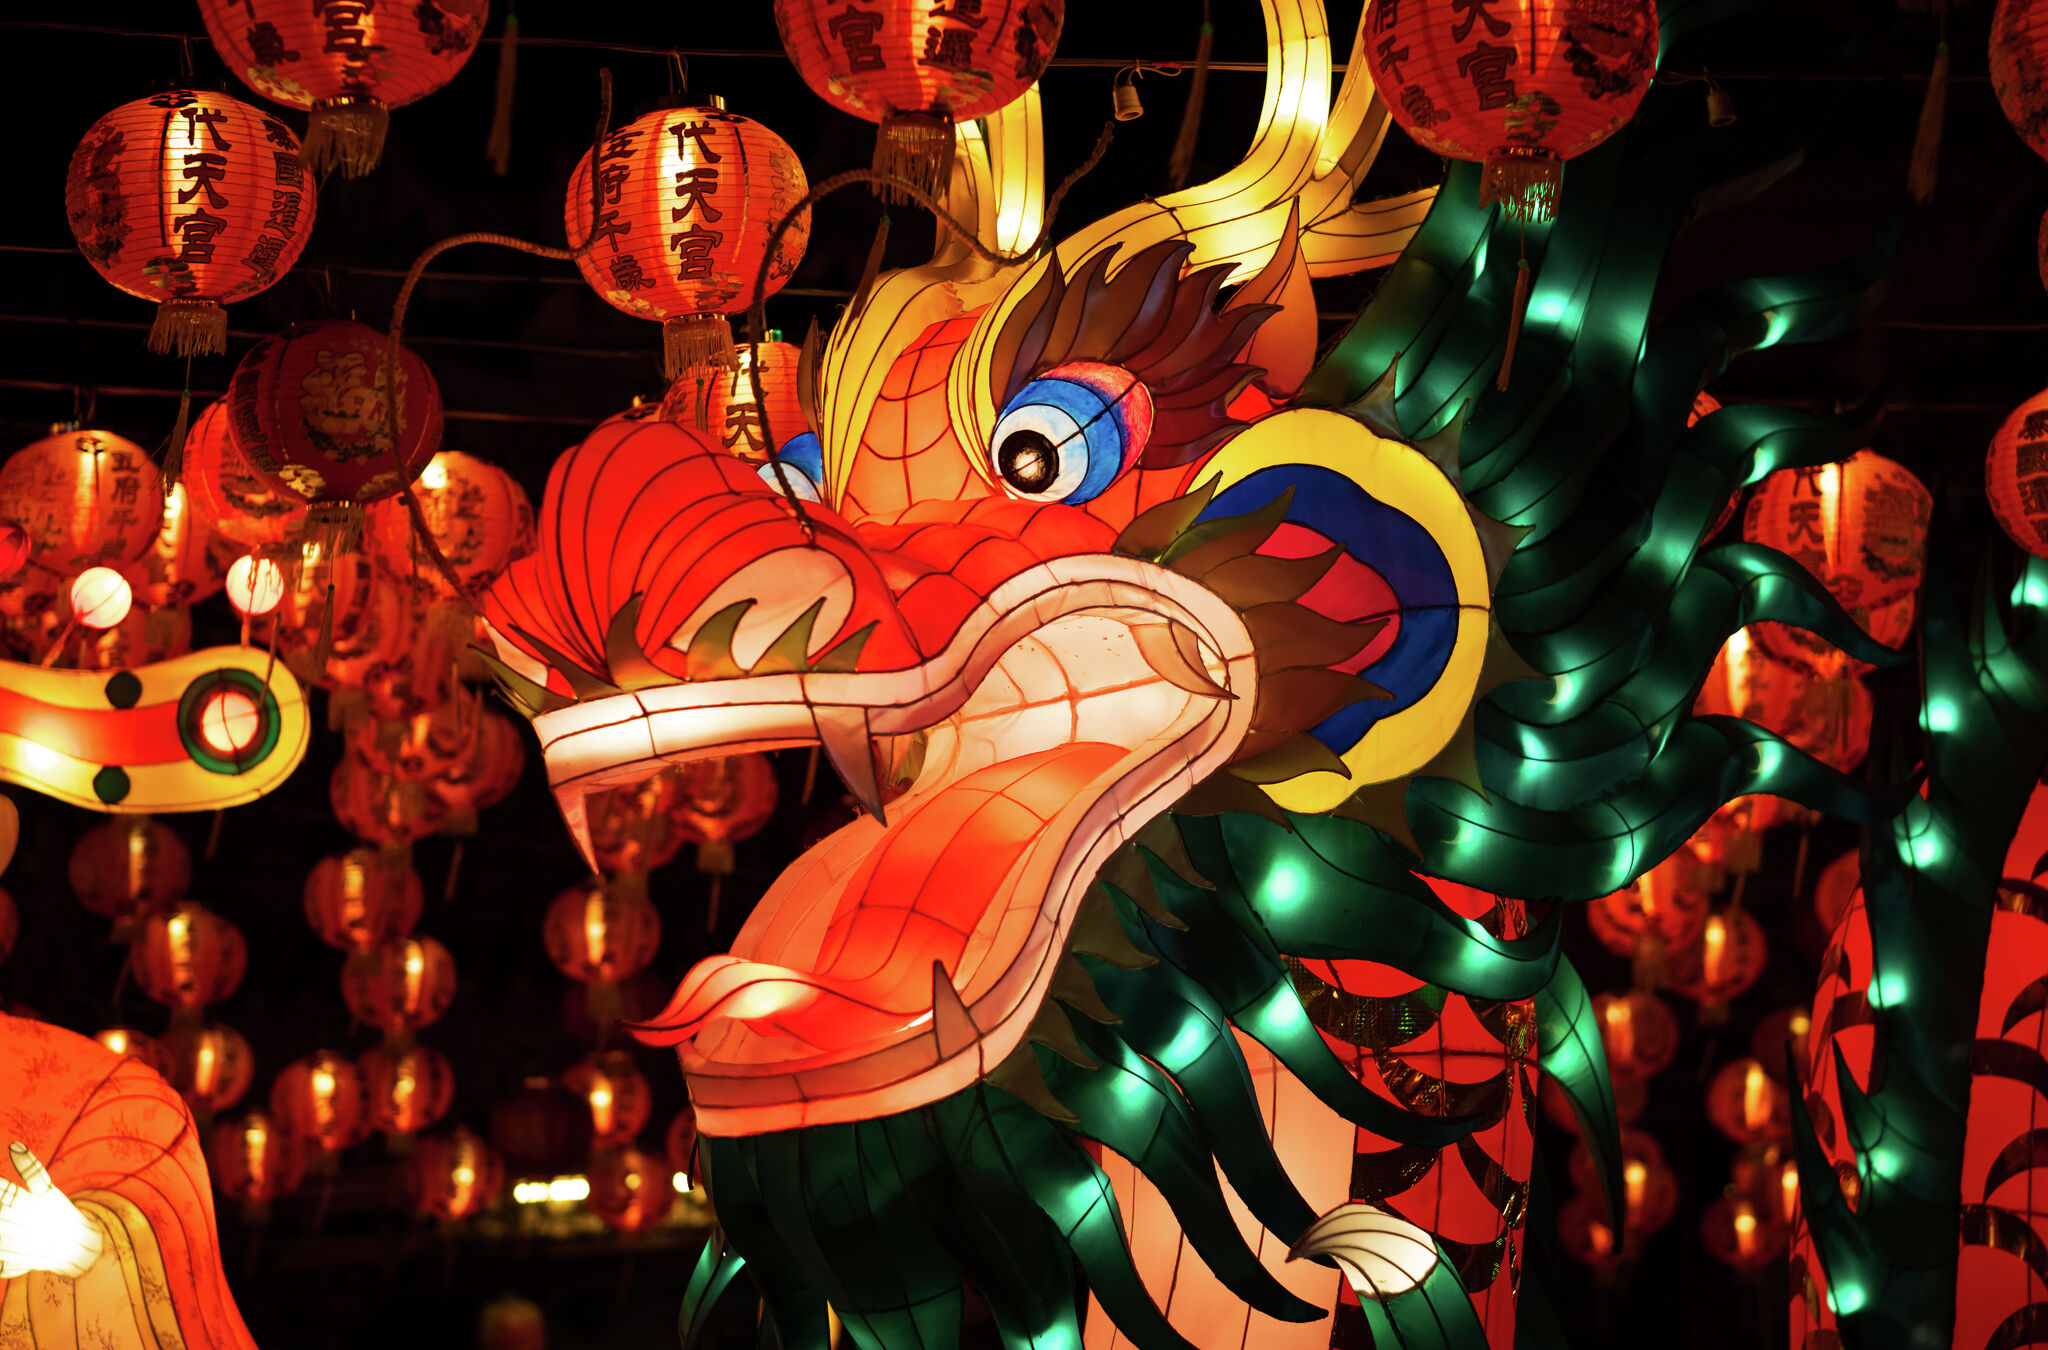 Grand Rapids Lantern Festival now open to visitors at John Ball Zoo